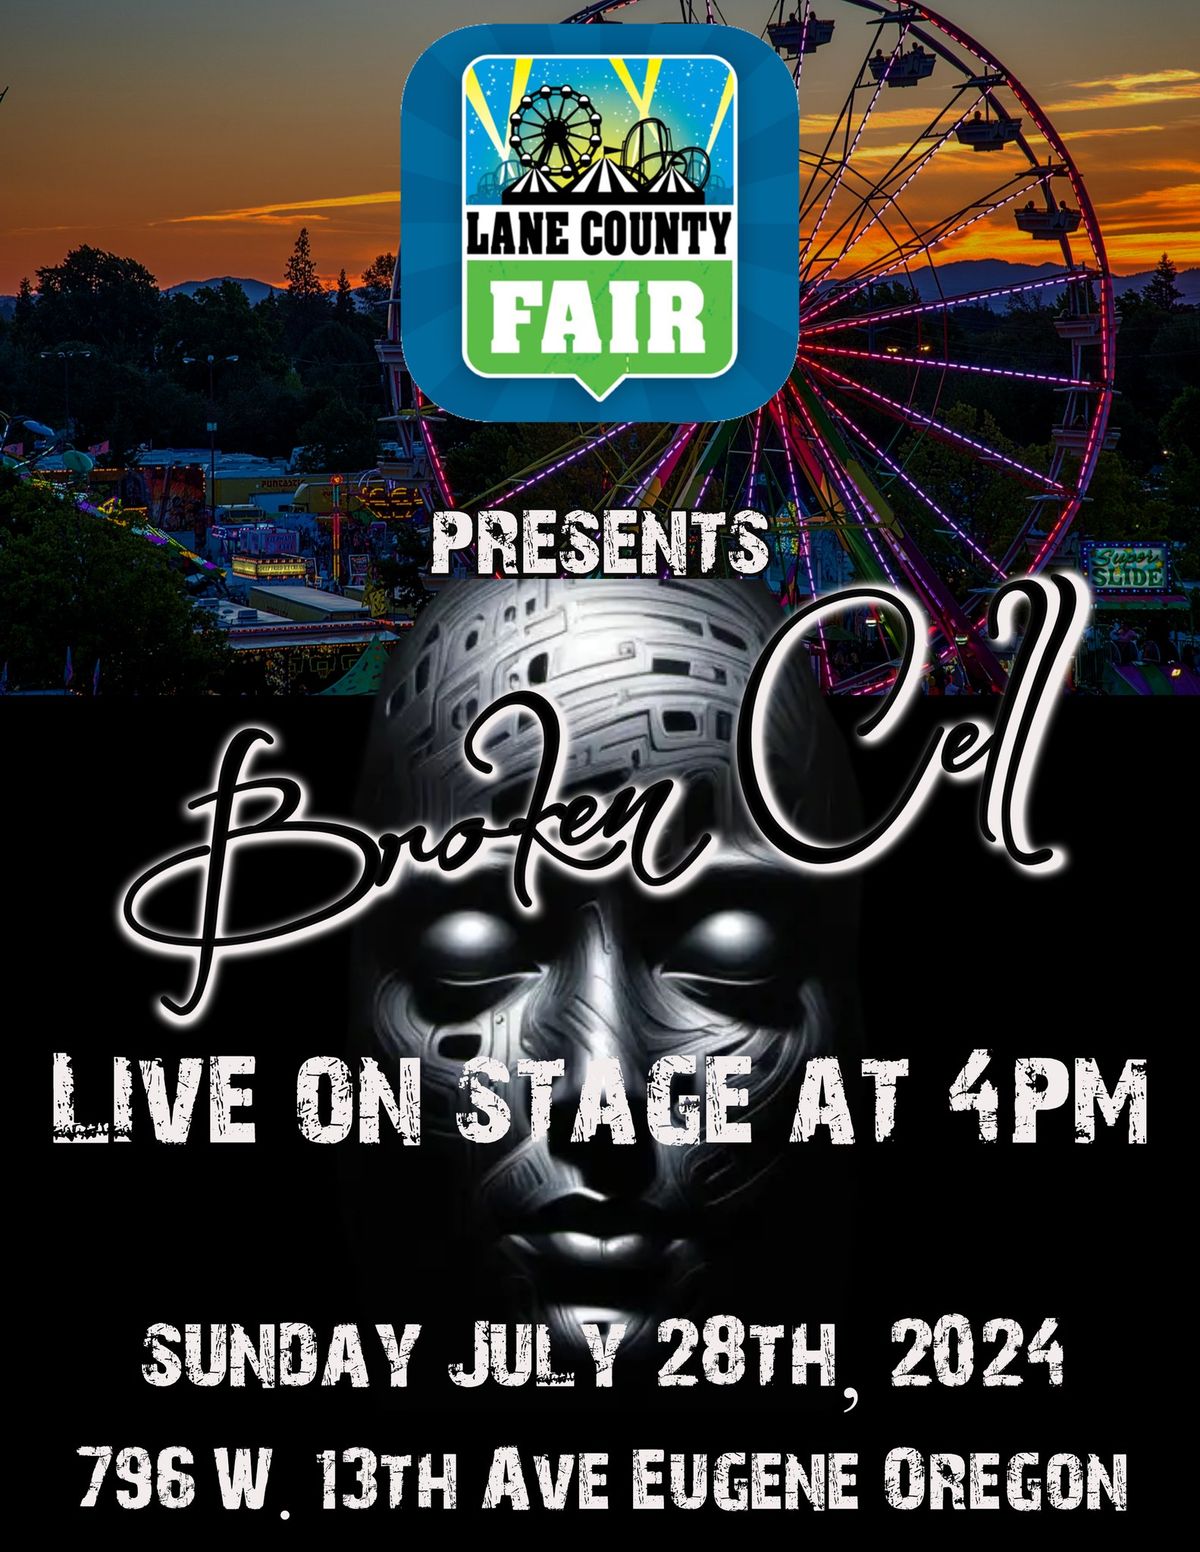 Broken Cell live on the Lane County Fair Public Stage Sunday July 28th at 4pm